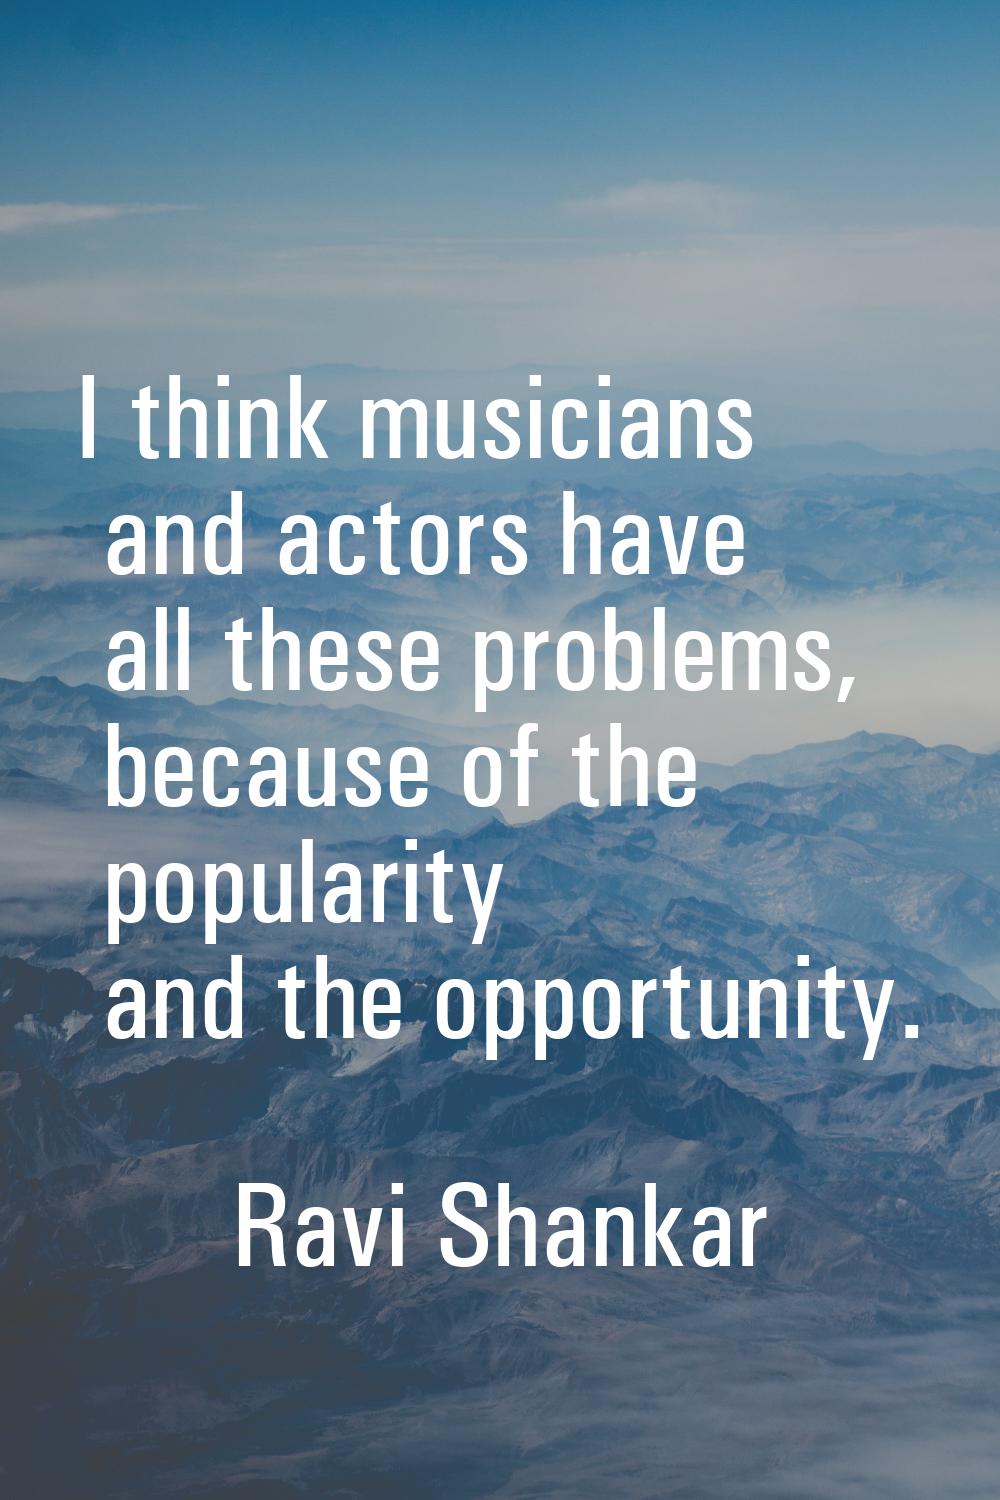 I think musicians and actors have all these problems, because of the popularity and the opportunity